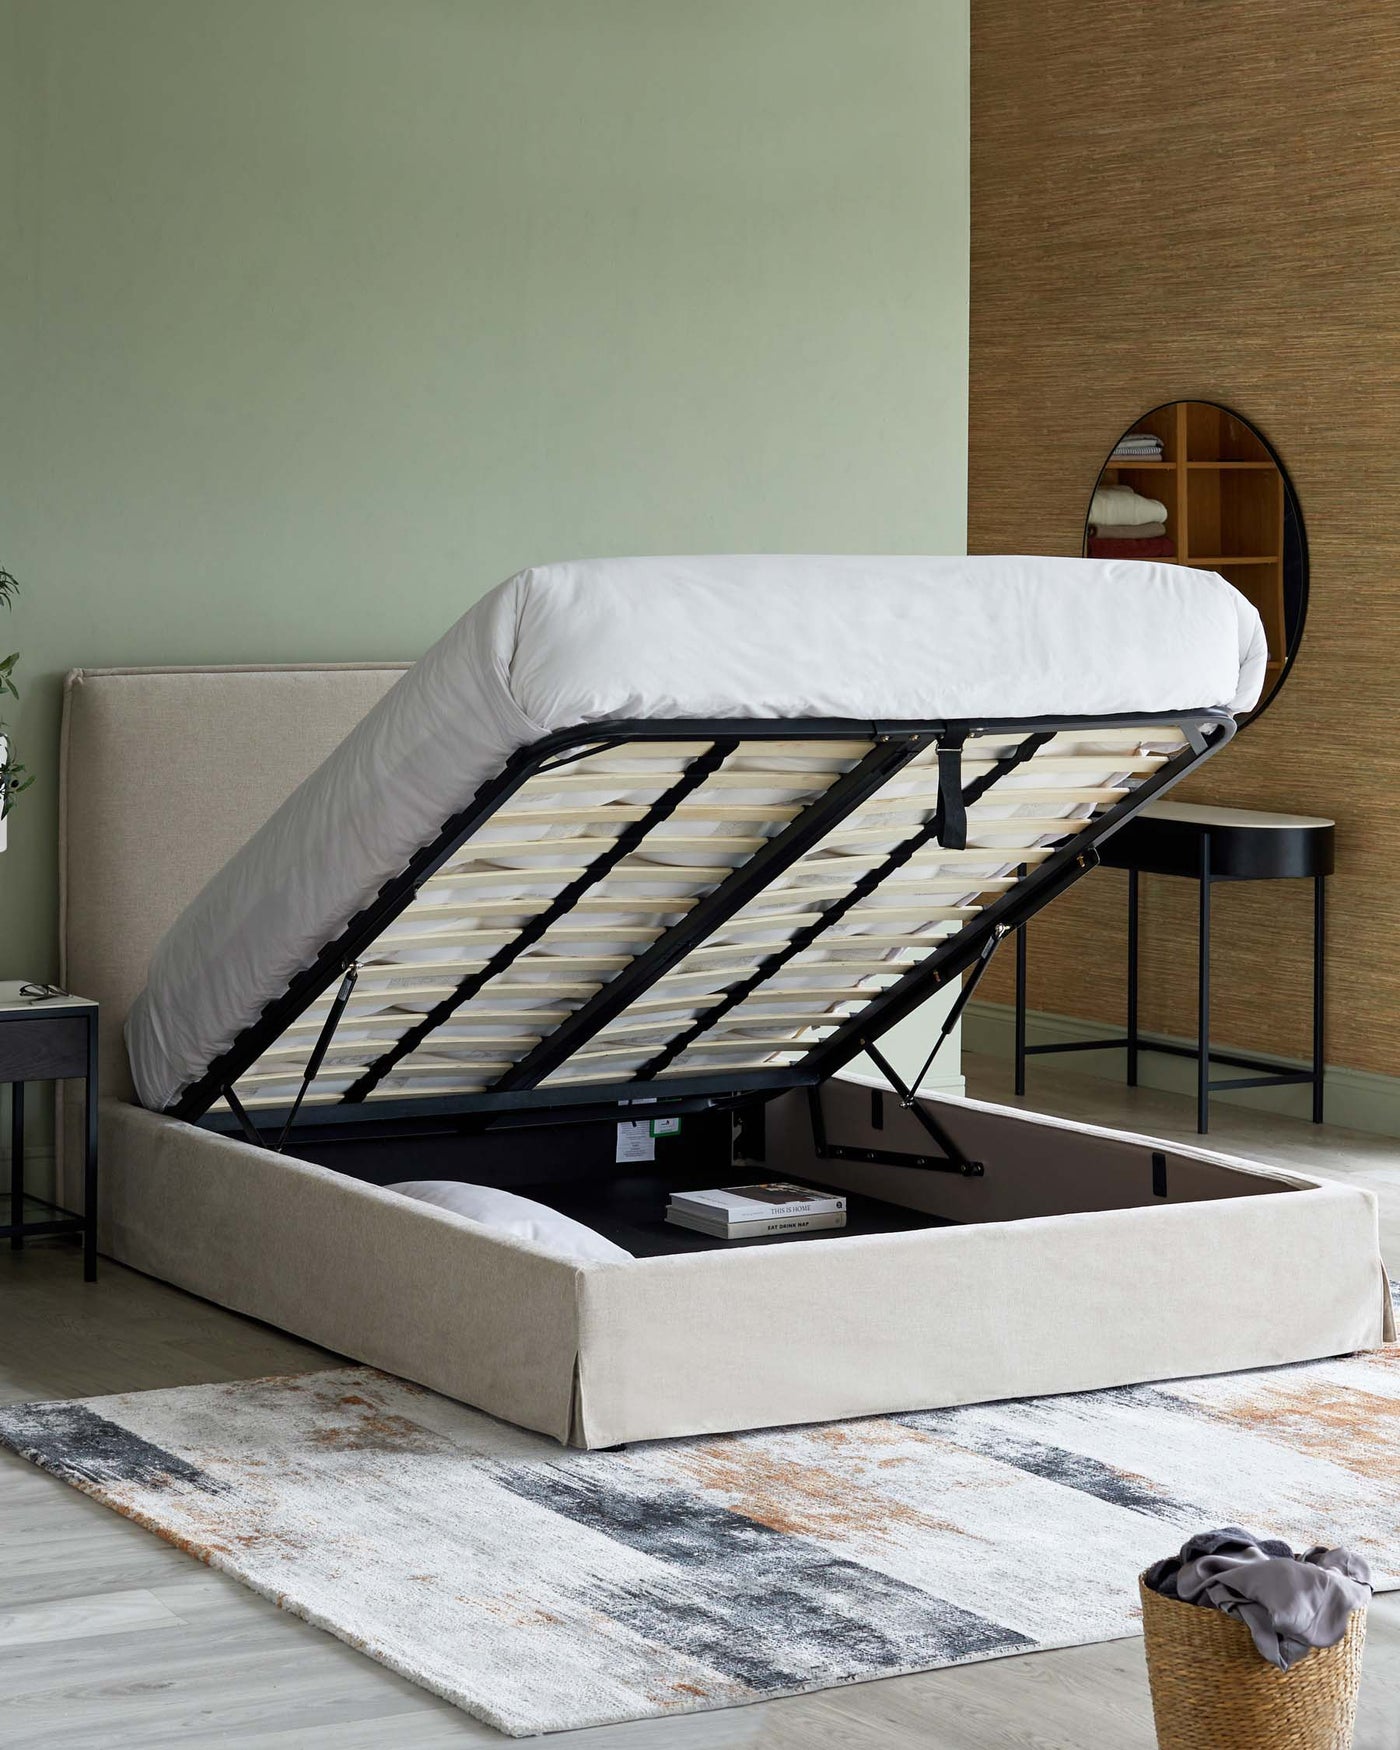 Beige upholstered storage bed with a lifted mattress base revealing a spacious storage compartment, accompanied by a round black side table and a circular wall mirror with a wooden partition, all atop a multi-coloured abstract pattern area rug.